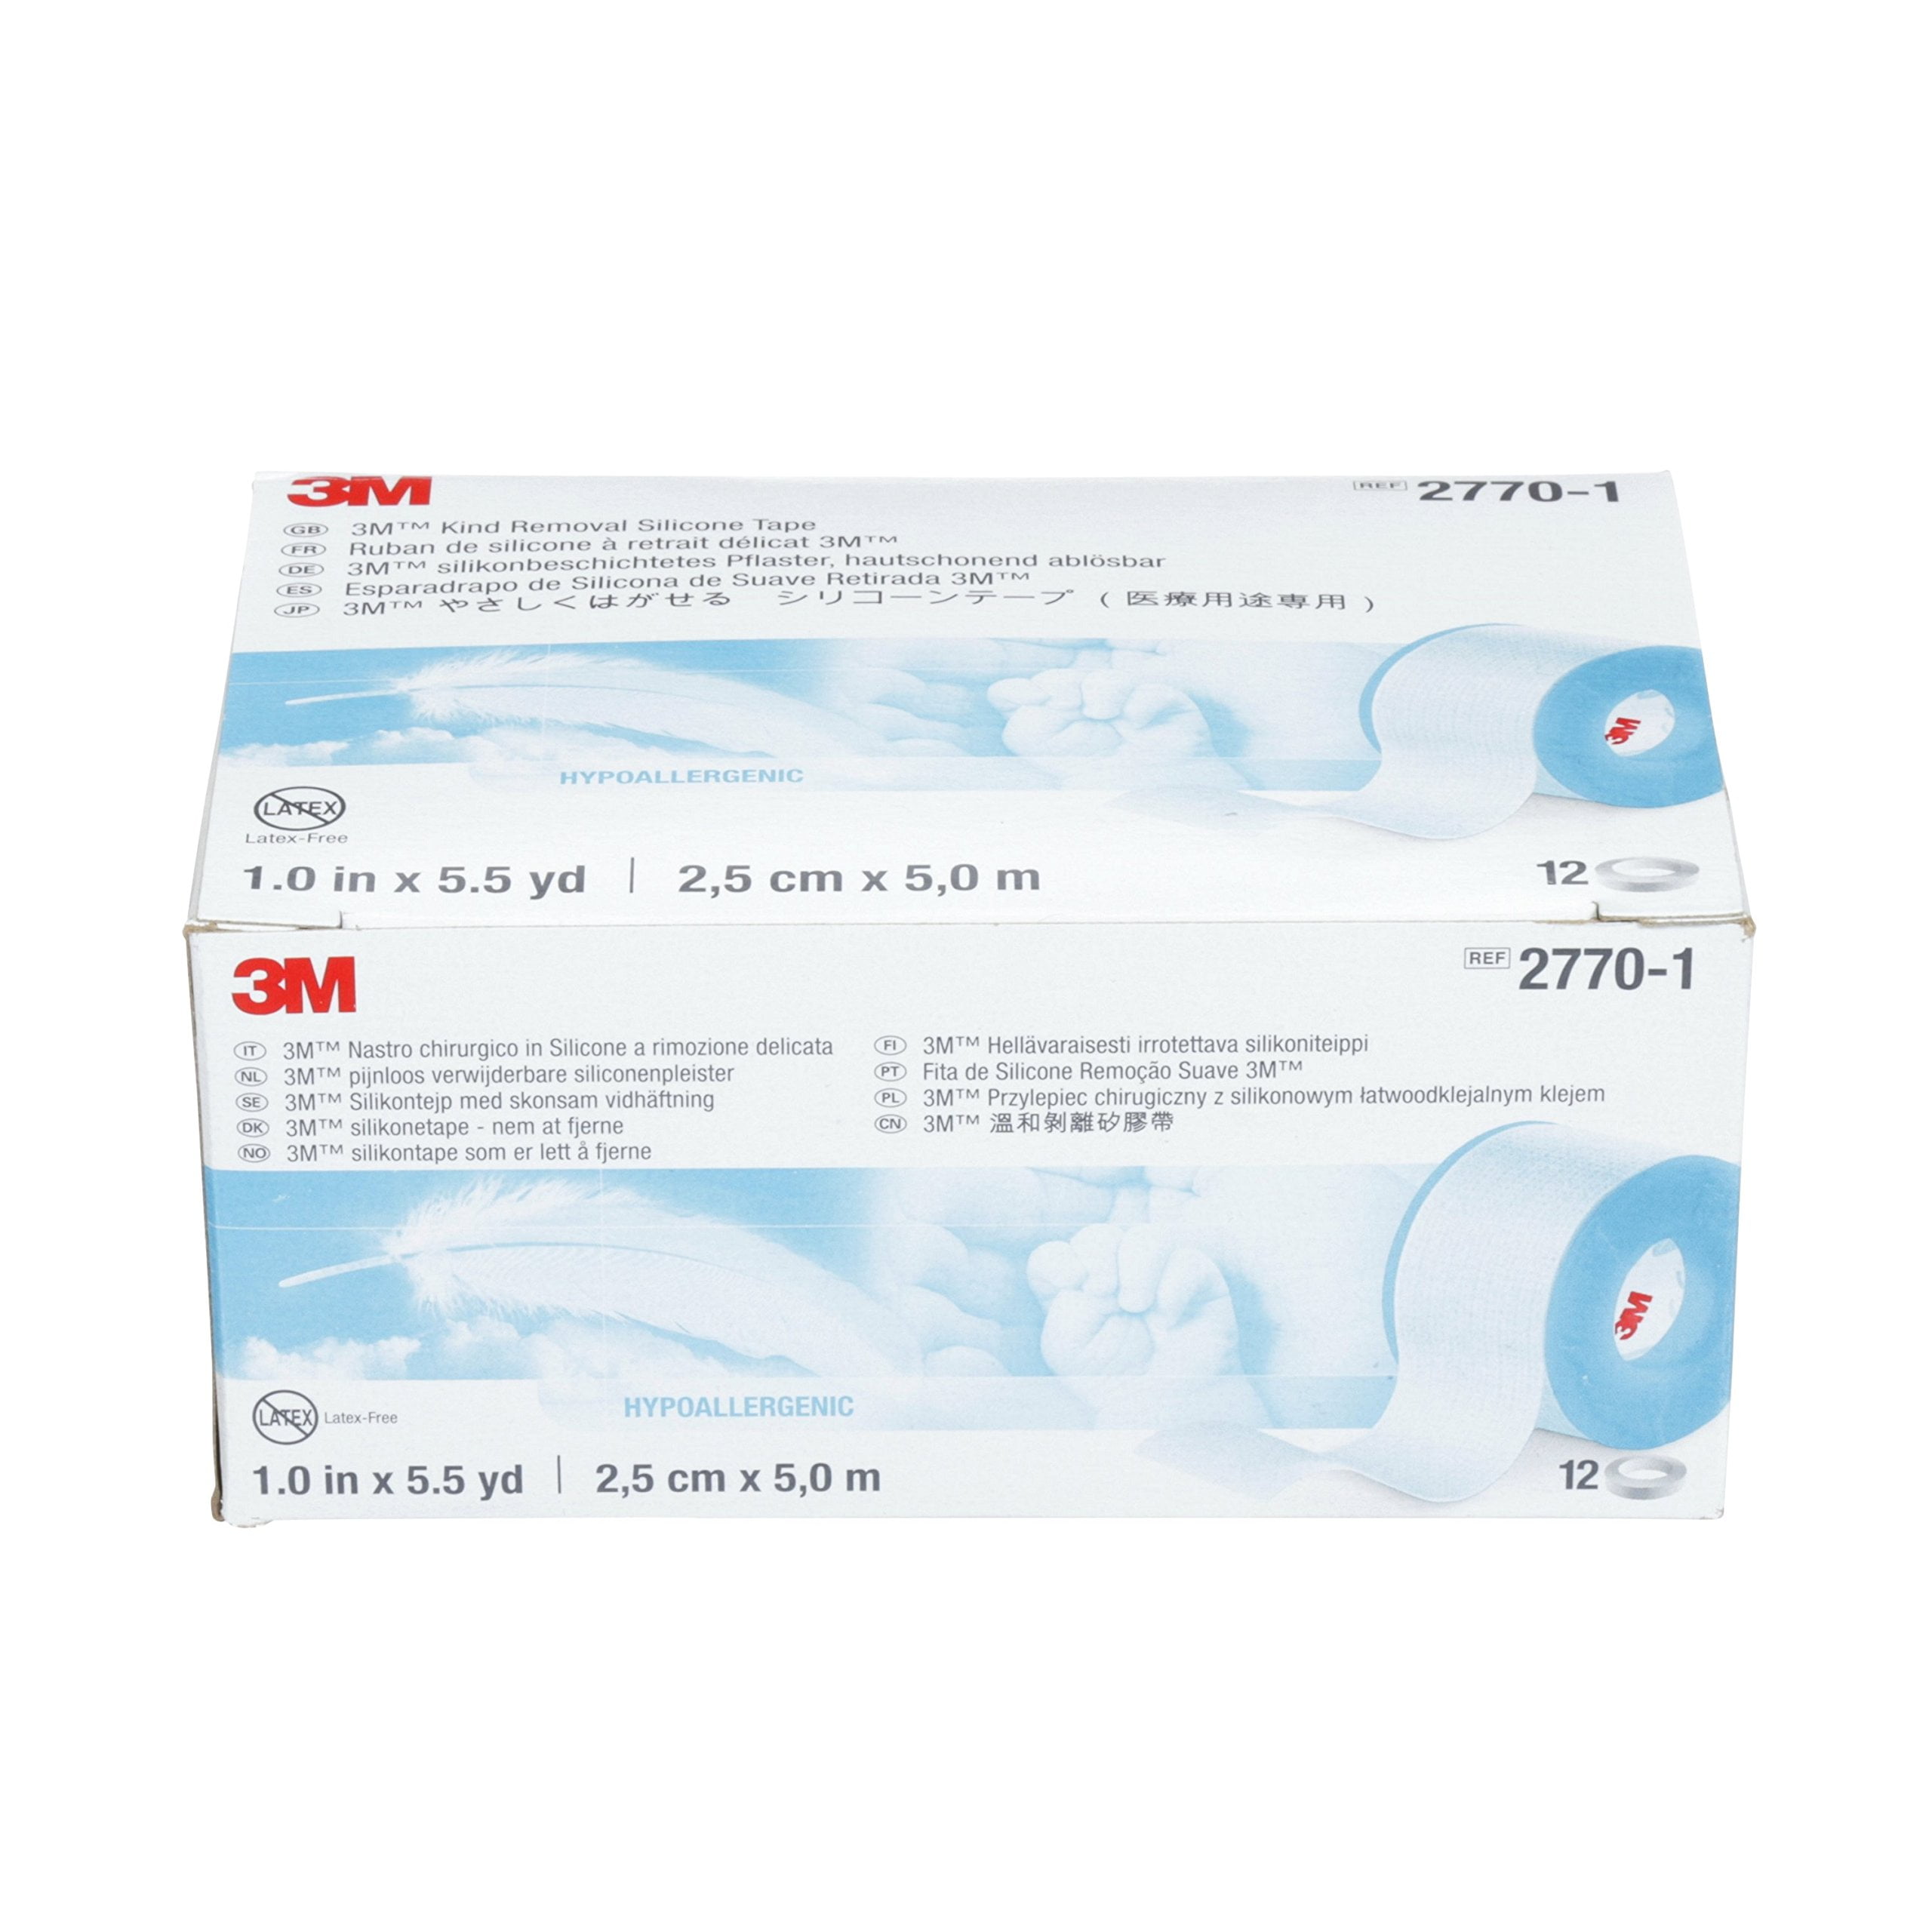 3M Micropore S Blue Silicone Medical Tape 1 x 5.5 Yd 1 Box, 12